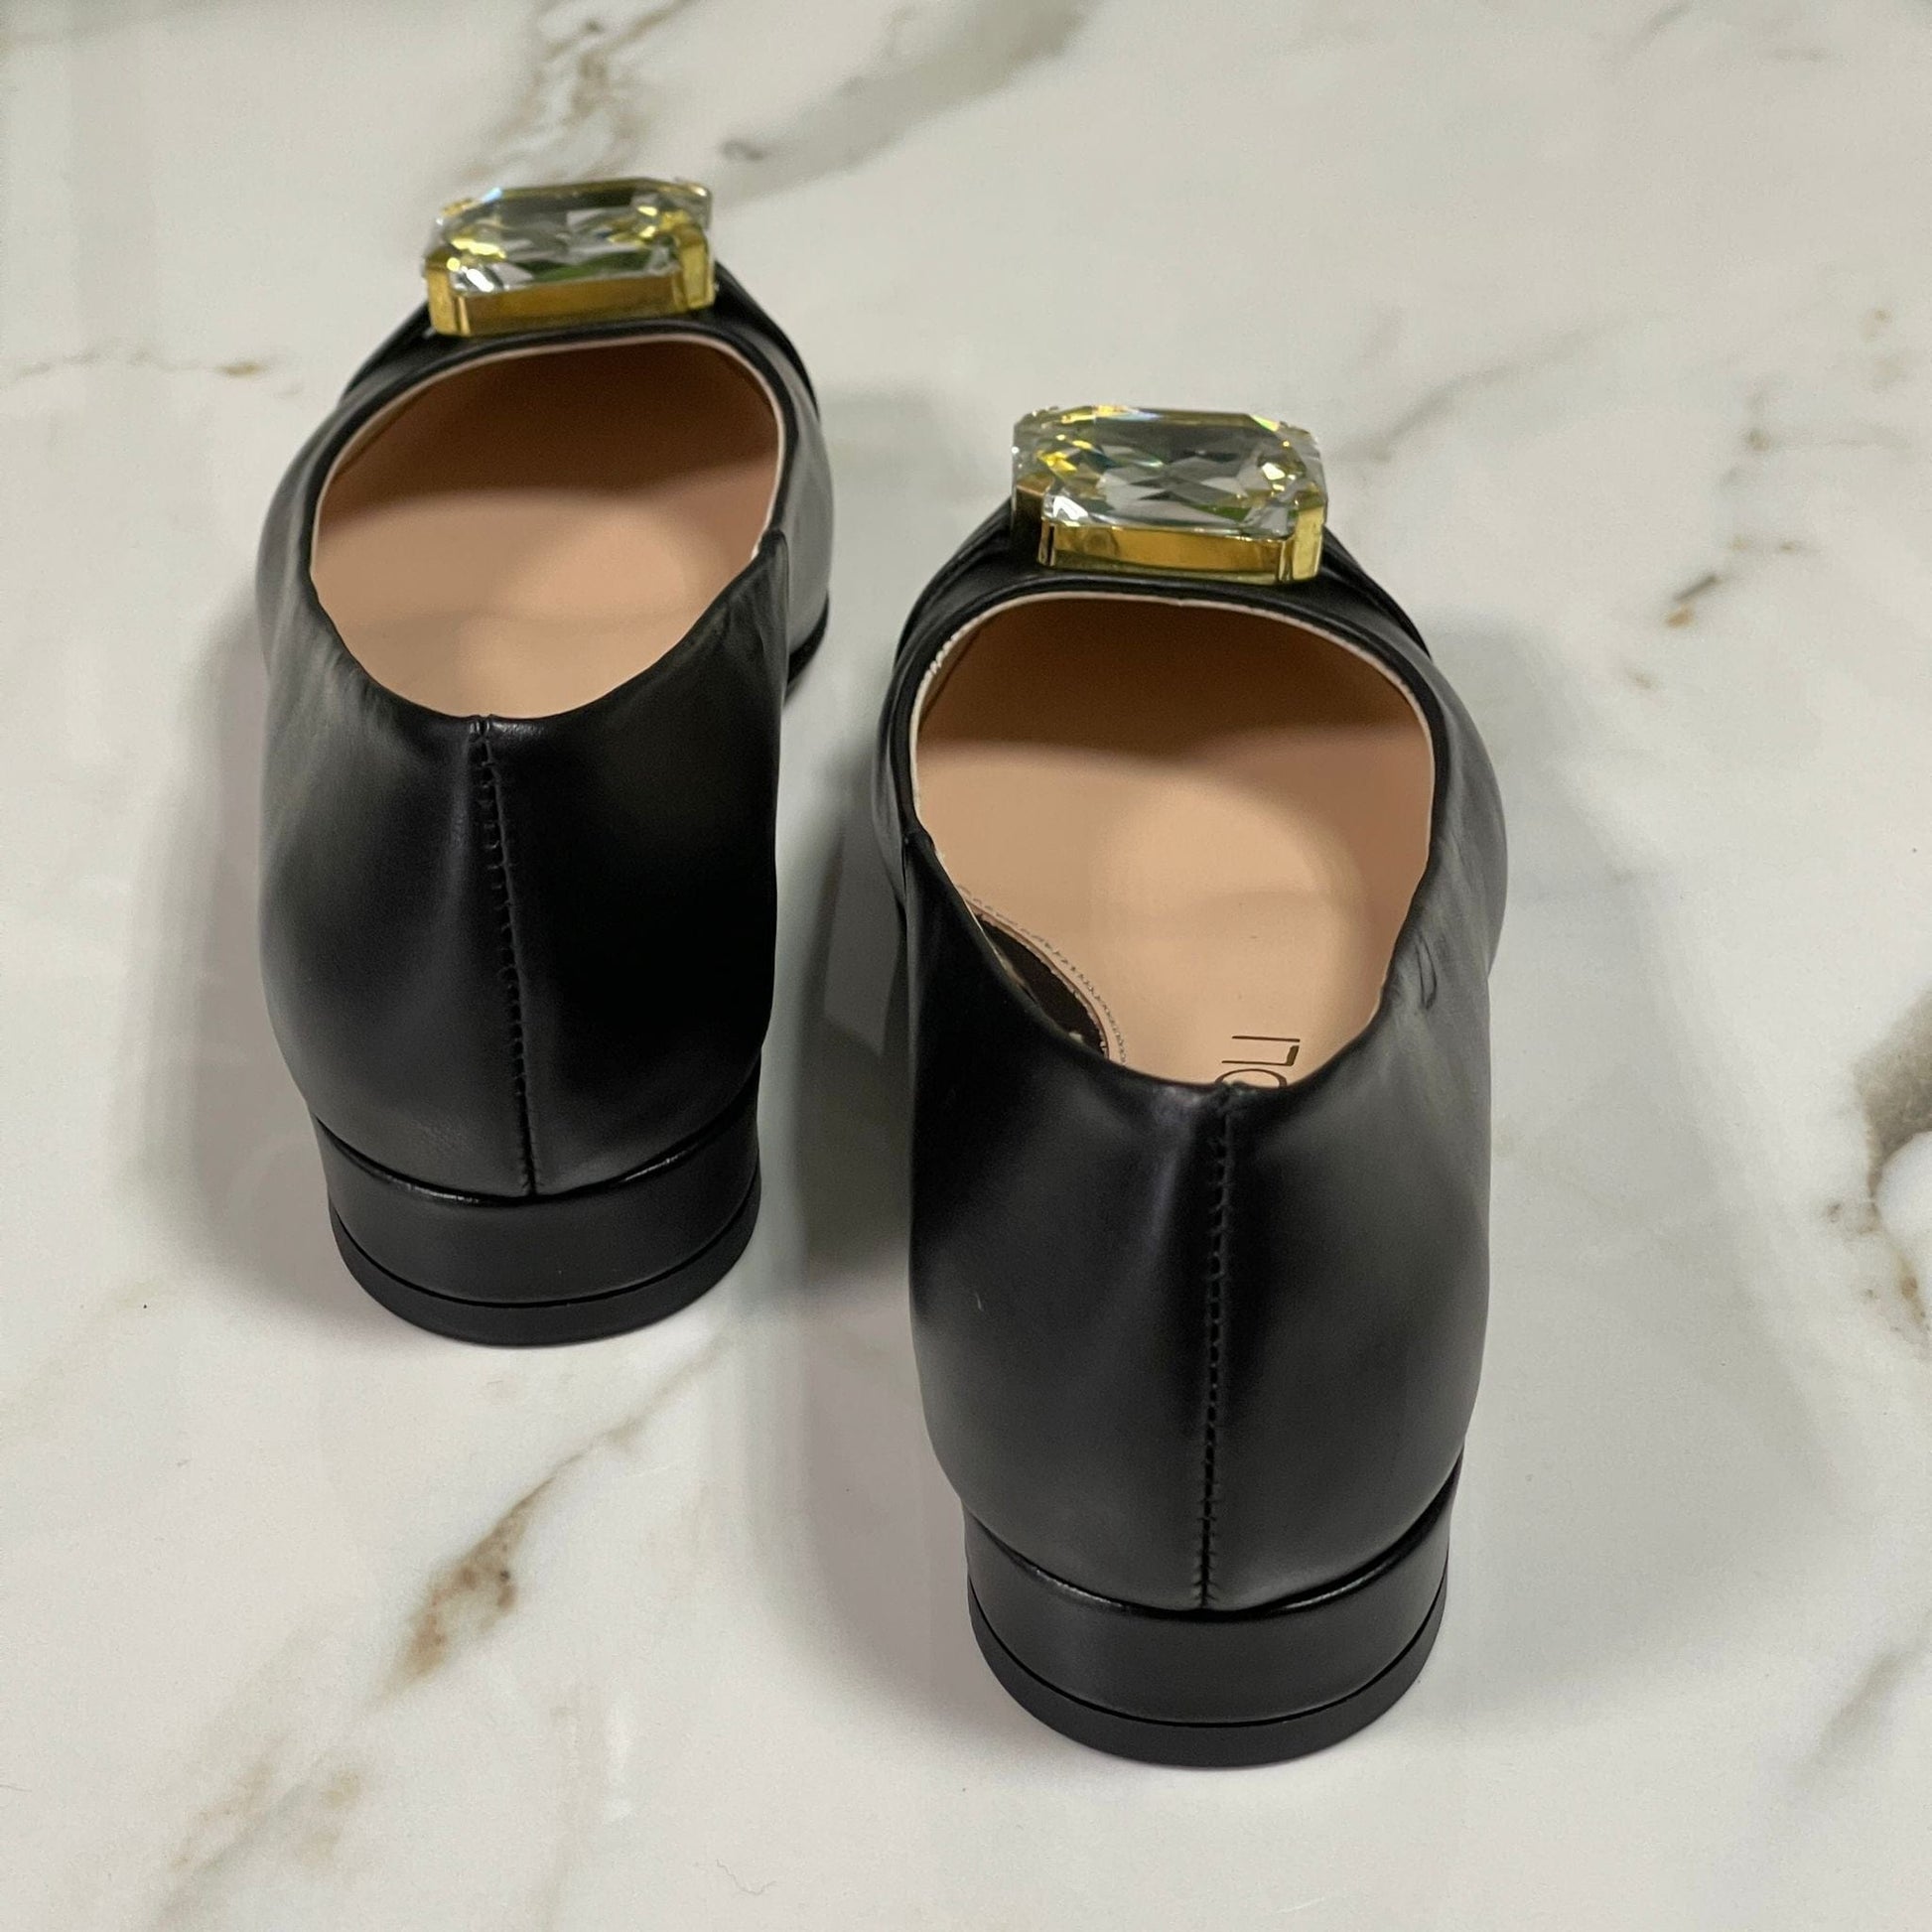 Pointed toe black leather ballerina shoes adorned with a crystal